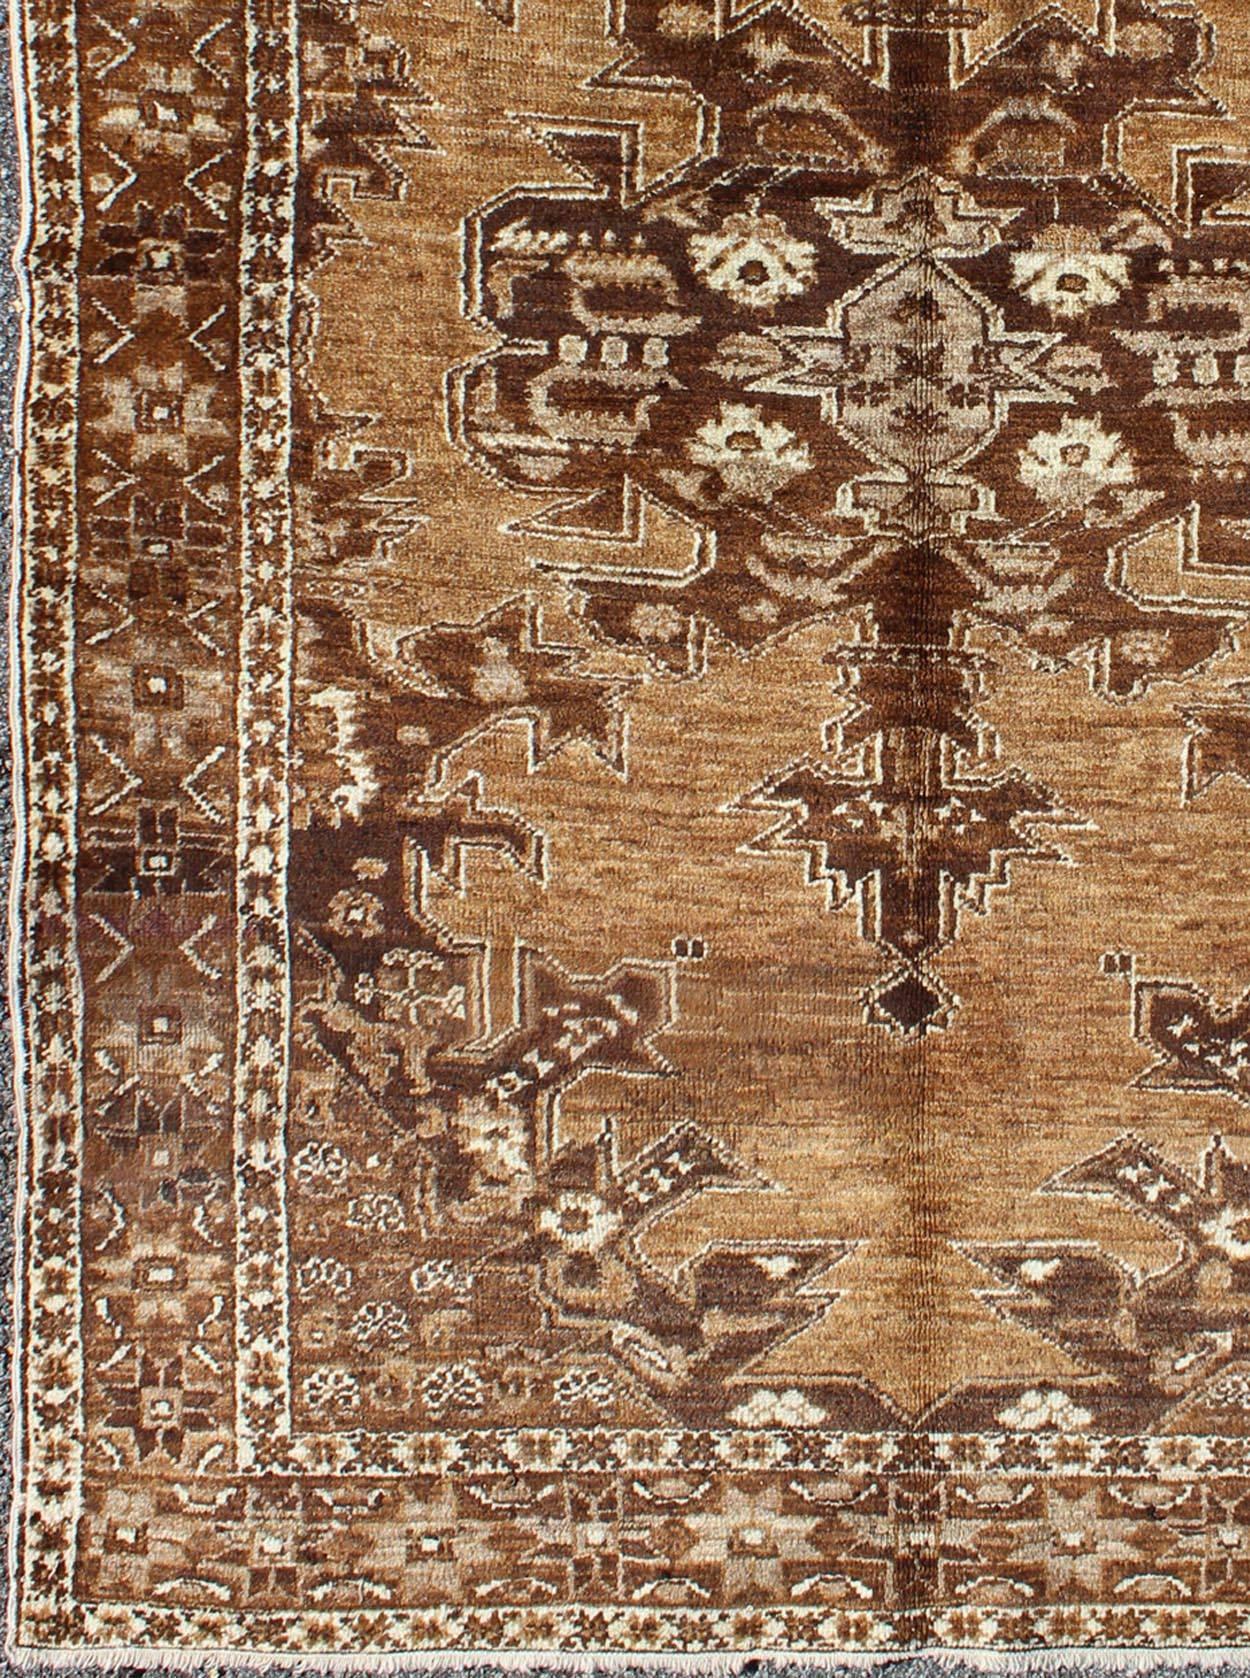 Brown Mid-Century vintage Turkish Oushak rug with floral multi-layered medallion, rug/EYP-4 , country of origin/type: Turkey/Oushak, circa 1930's century.
This antique Turkish Oushak carpet  features a central, multi-layered medallion design, as